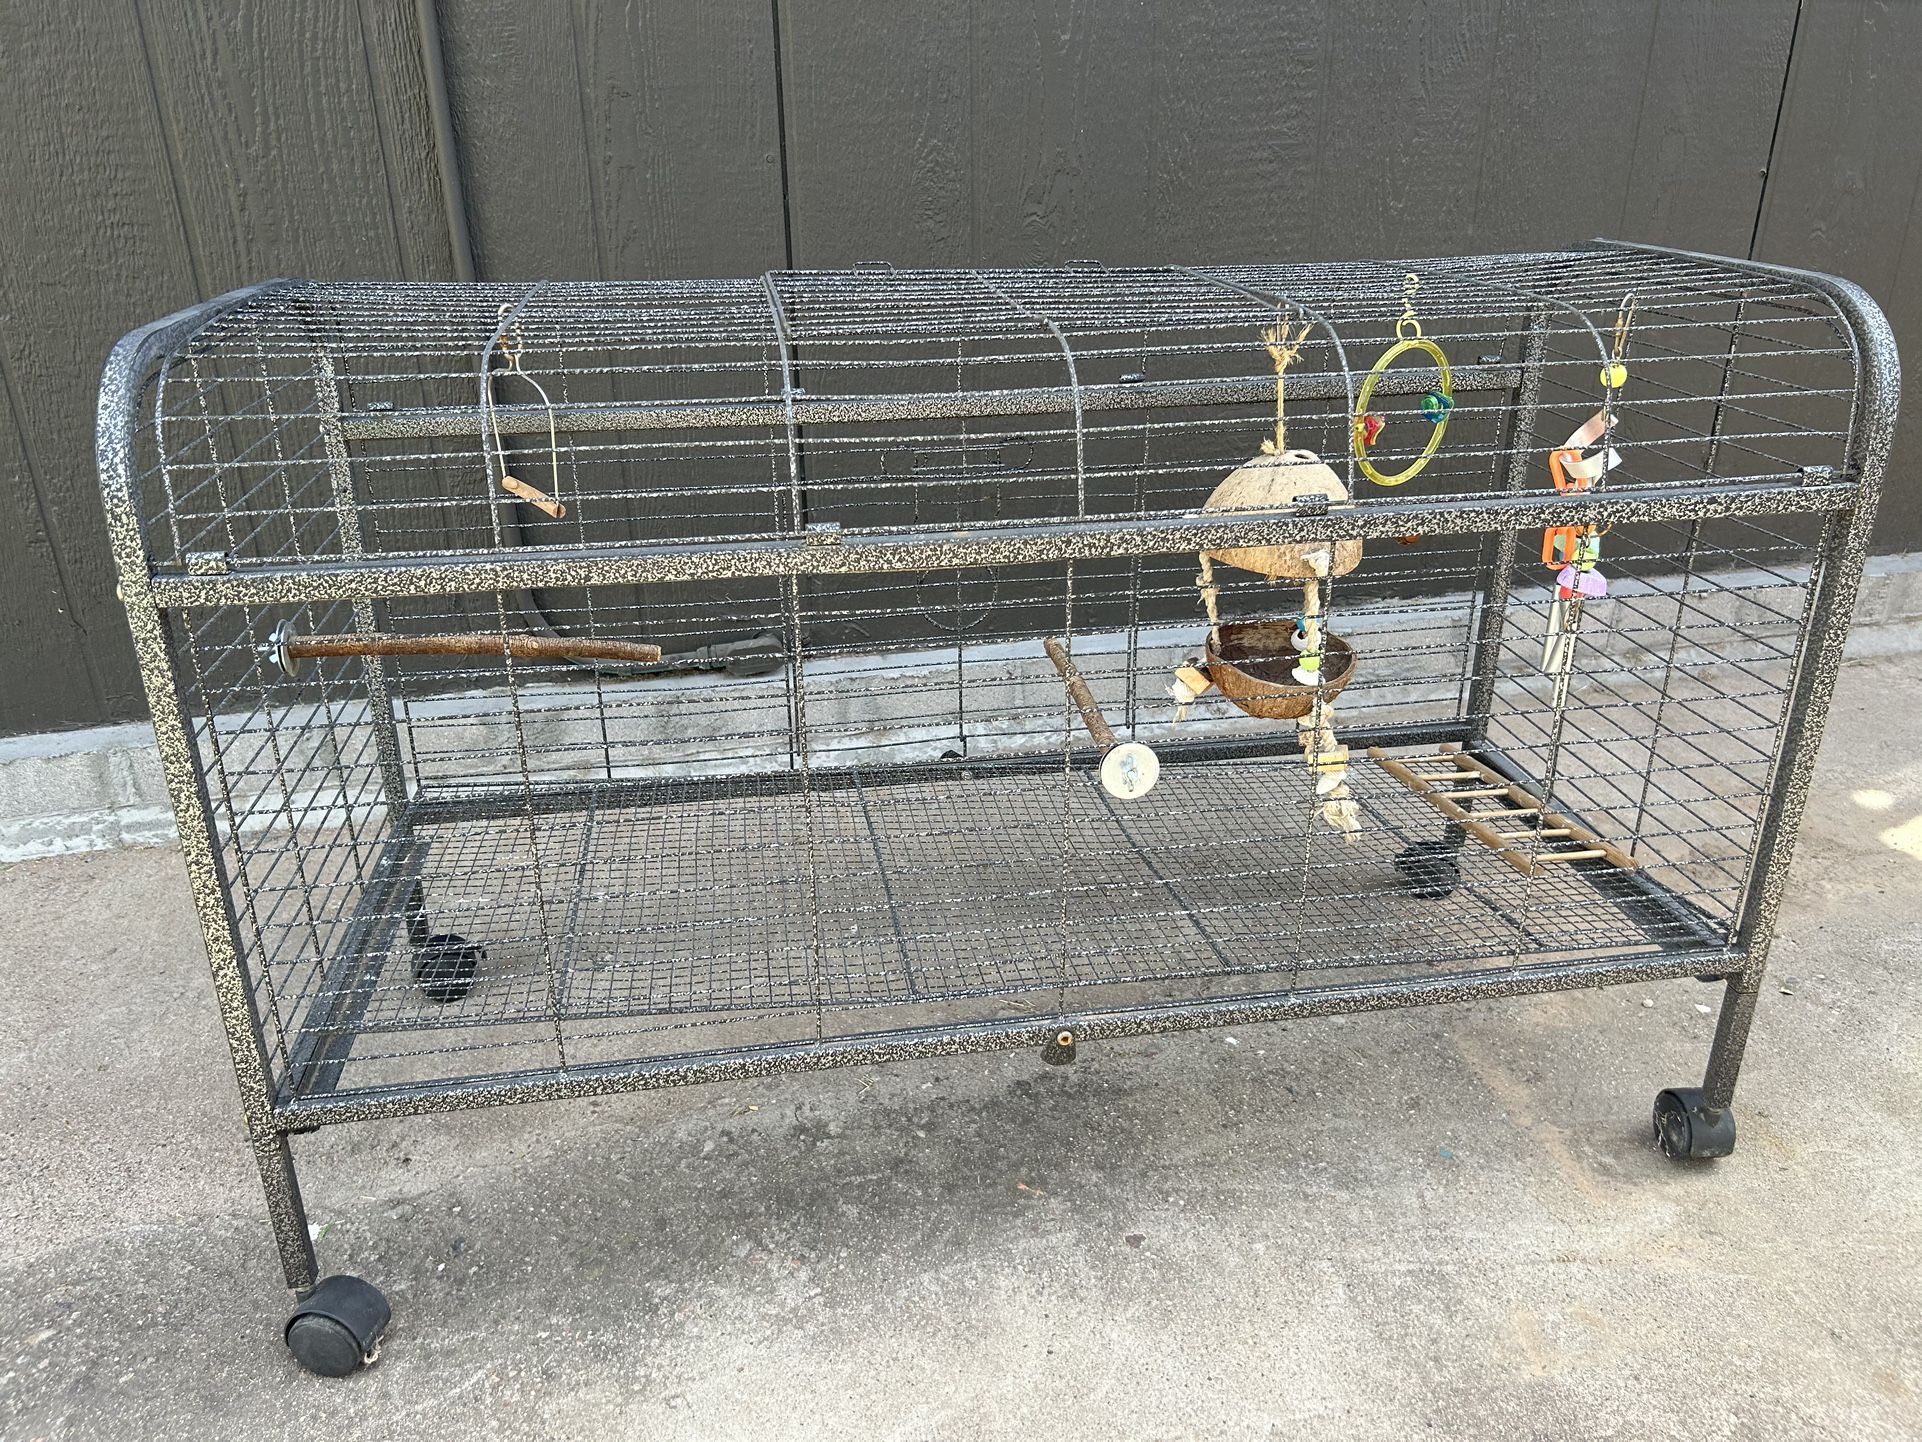 Bird Cage With Rollers